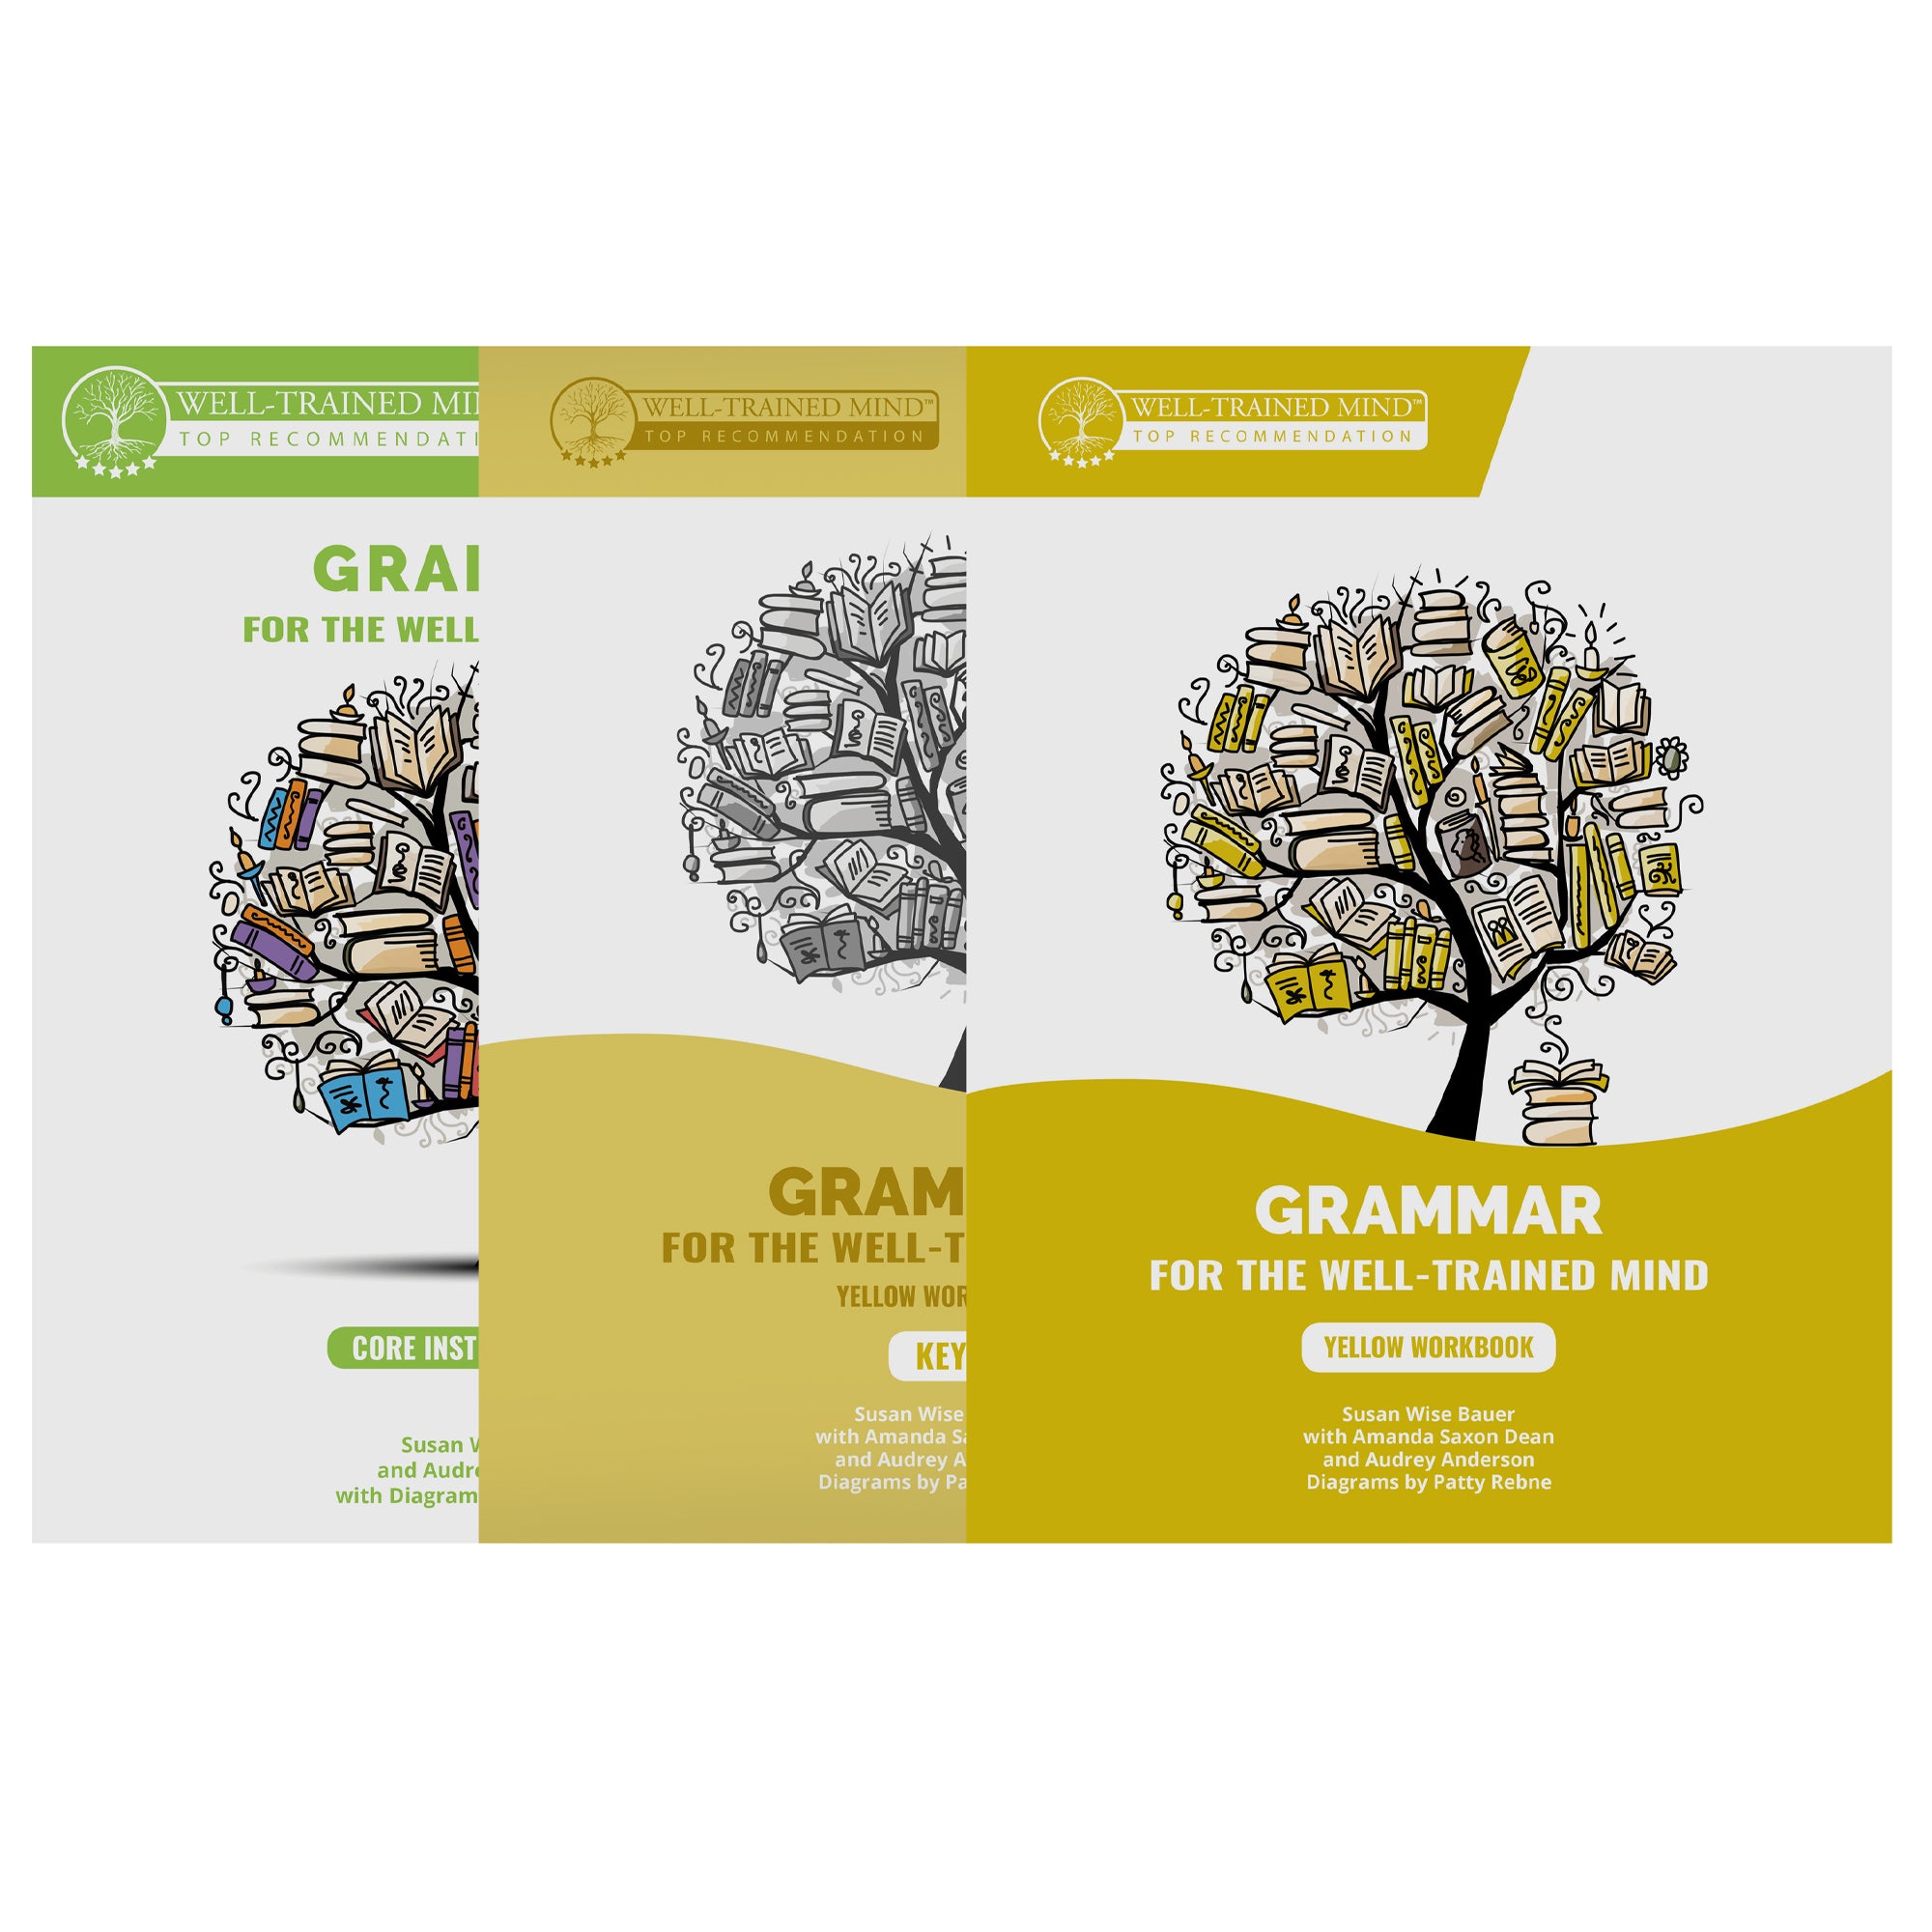 Grammar for the Well-Trained Mind Yellow bundle of 3 books. The front book has a white top and a yellow bottom with a wave shape between the 2 colors. There is an illustration in the white section of a tree with books for leaves and a stack of books near the trunk. In the yellow section at the bottom is white text, including the title and “Yellow Workbook.” Tucked behind the yellow book is a lighter yellow version of this book, then a green version behind the light yellow book.